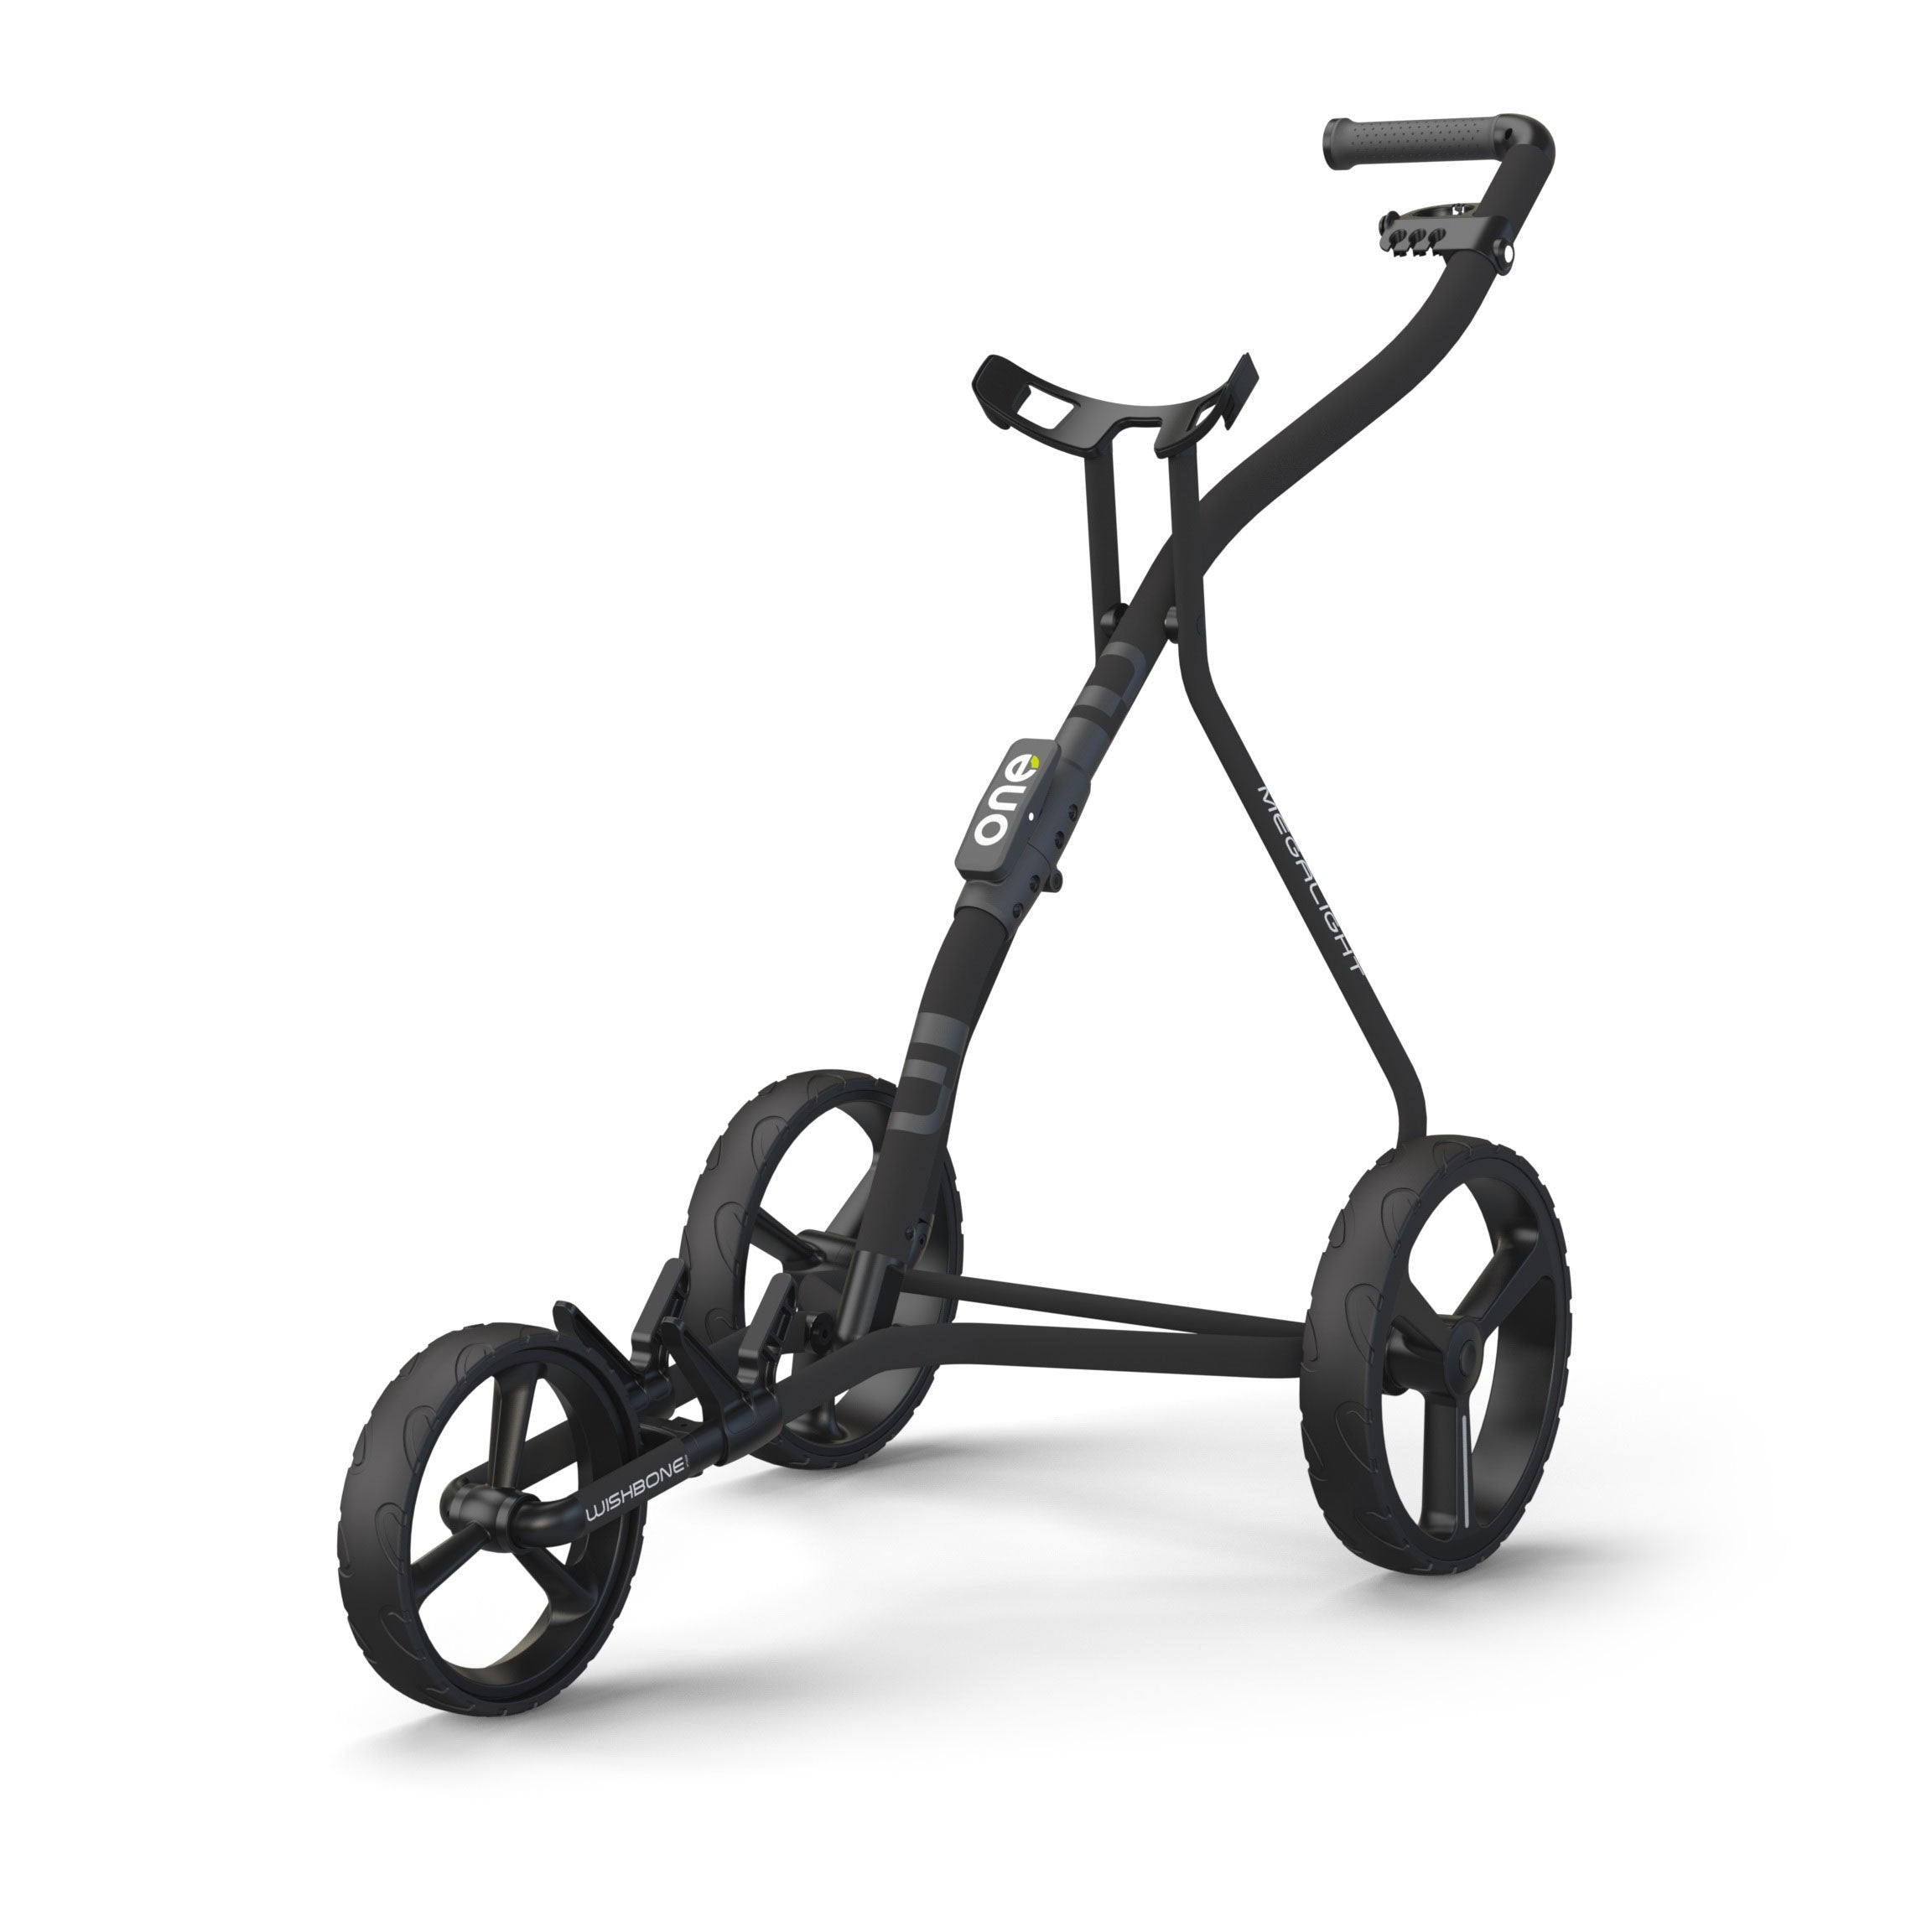 Golf Trolley Wishbone ONE Megalight Lightest Cart In Its Class, Utilizing the very latest materials and weight saving design, this cart (under 4 kg) is the lightest cart in its class by far. Maximum weight reduction and easy handling are based on a clear design concept. With high demands on the minimalistic design, this unique pushcart comes with surprising and modern technical solutions.